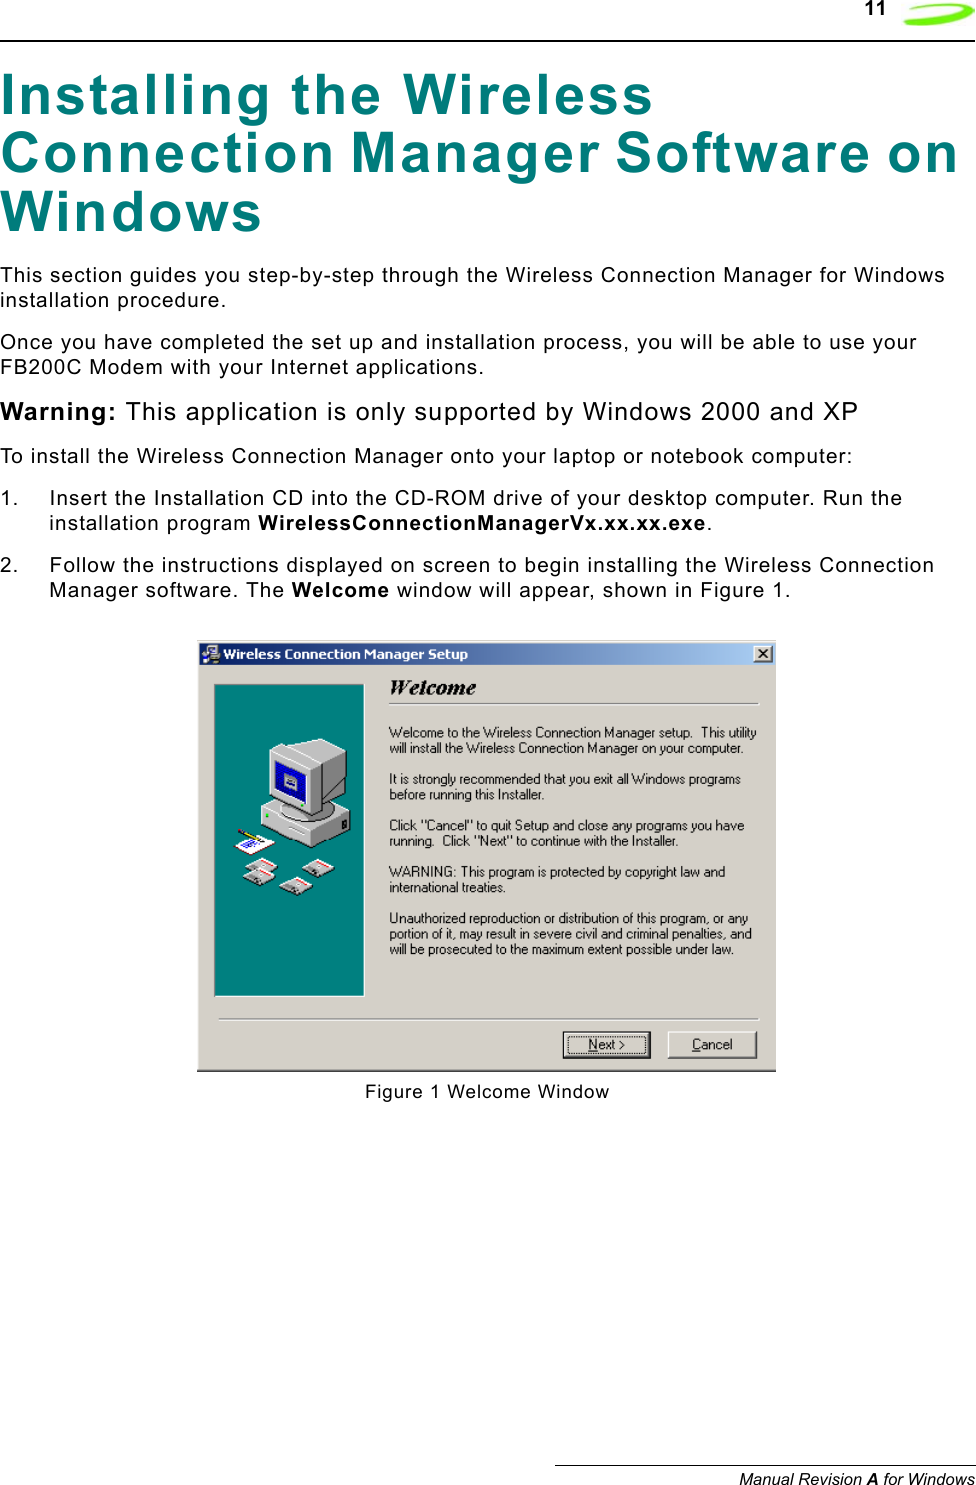    11Manual Revision A for WindowsInstalling the Wireless Connection Manager Software on WindowsThis section guides you step-by-step through the Wireless Connection Manager for Windows installation procedure. Once you have completed the set up and installation process, you will be able to use your FB200C Modem with your Internet applications.Warning: This application is only supported by Windows 2000 and XPTo install the Wireless Connection Manager onto your laptop or notebook computer:1. Insert the Installation CD into the CD-ROM drive of your desktop computer. Run the installation program WirelessConnectionManagerVx.xx.xx.exe.2. Follow the instructions displayed on screen to begin installing the Wireless Connection Manager software. The Welcome window will appear, shown in Figure 1.Figure 1 Welcome Window